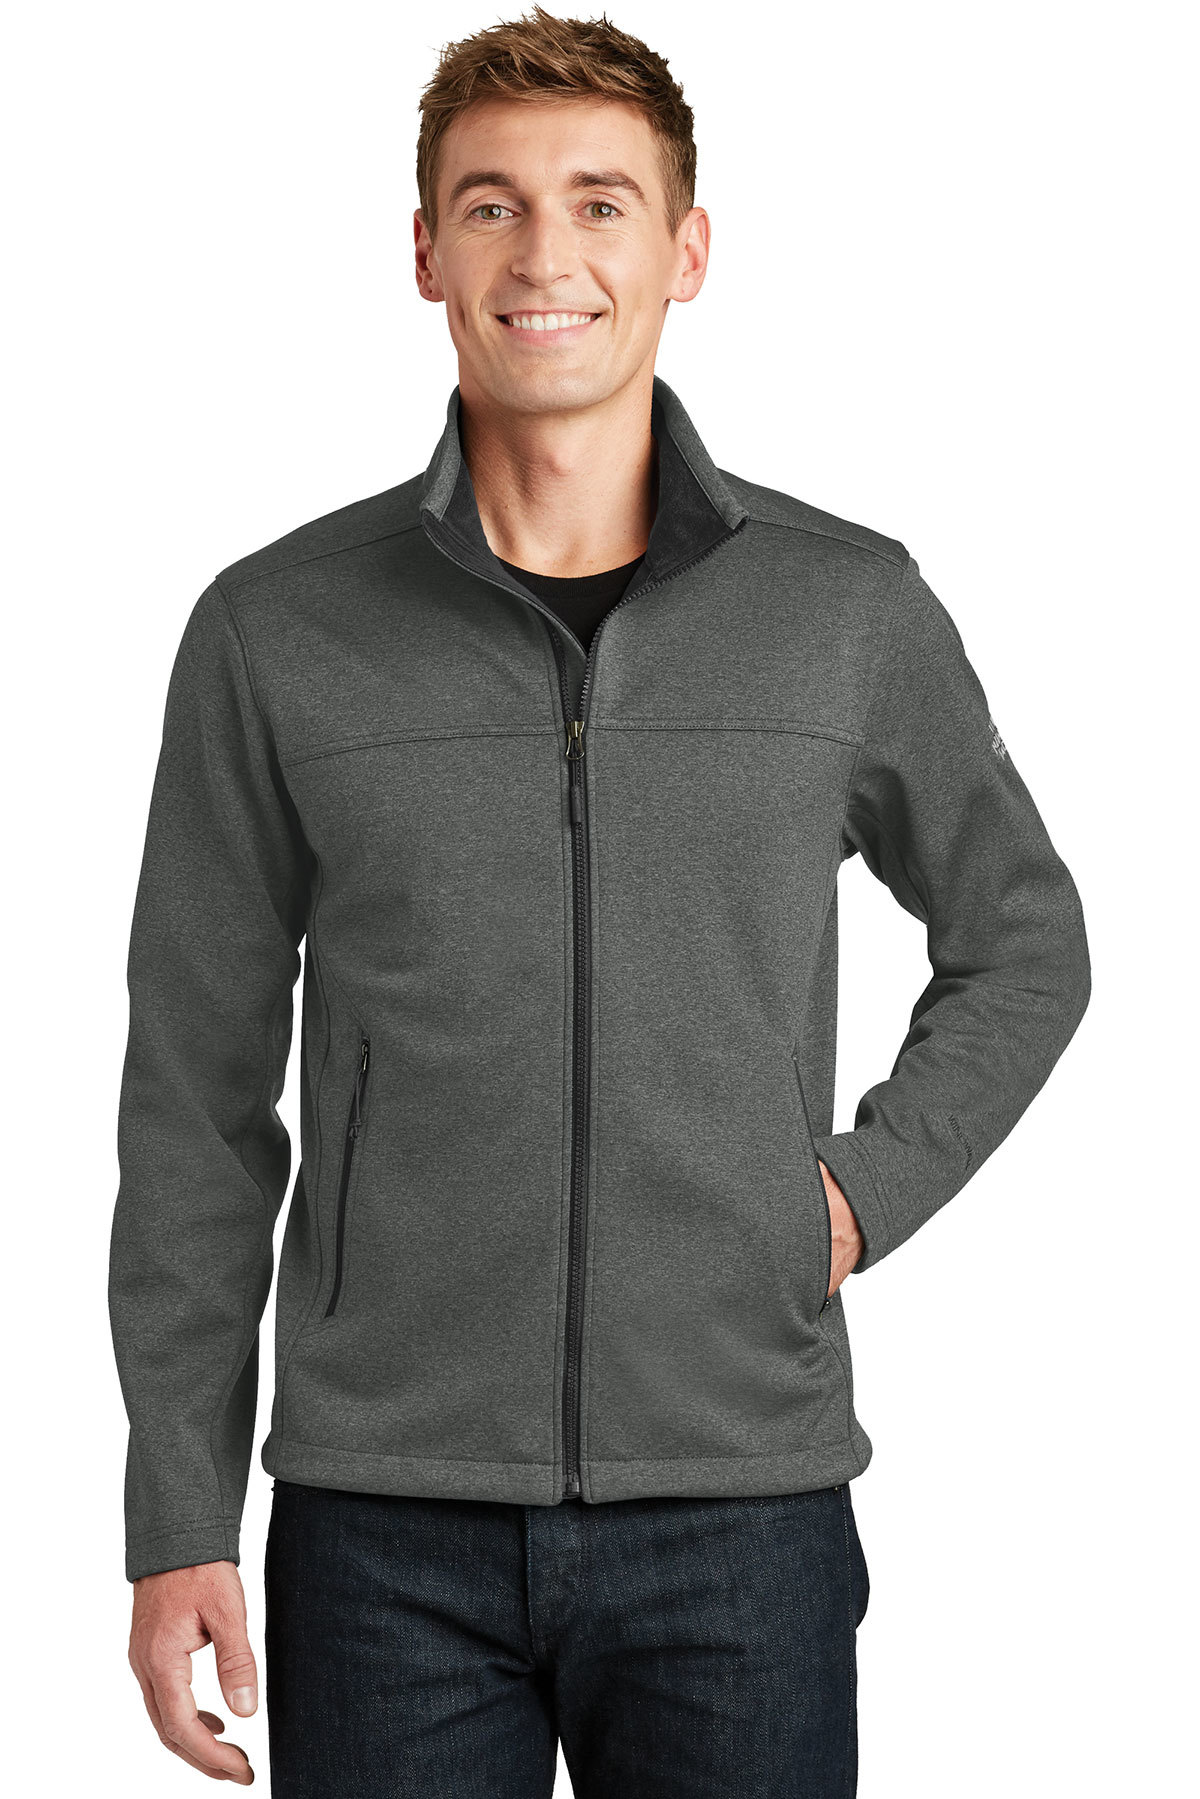 north face corporate jackets